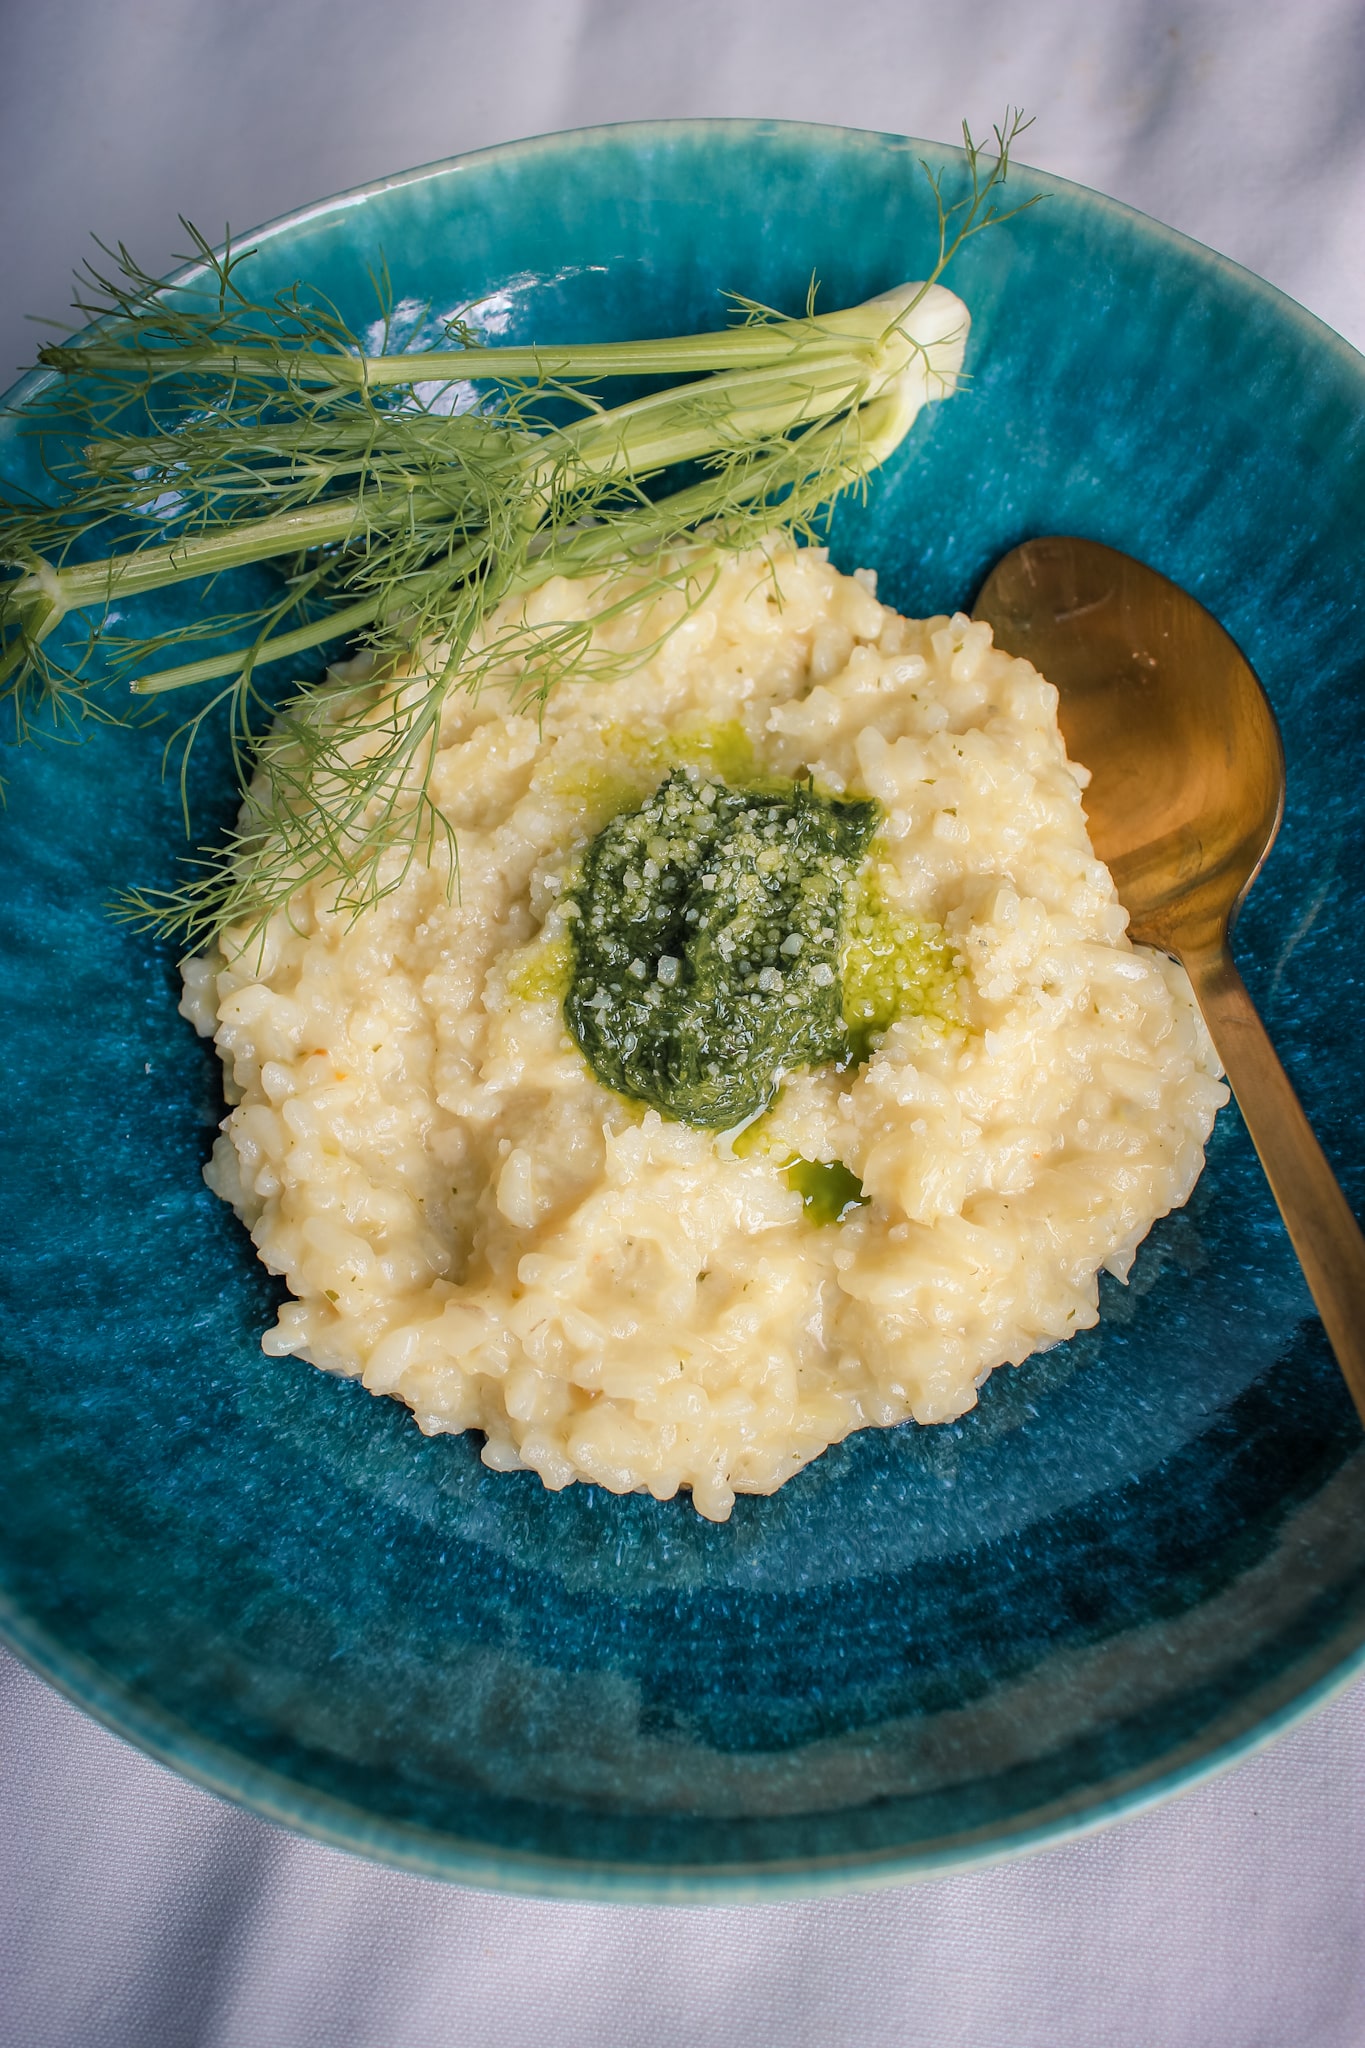 Fenchelrisotto